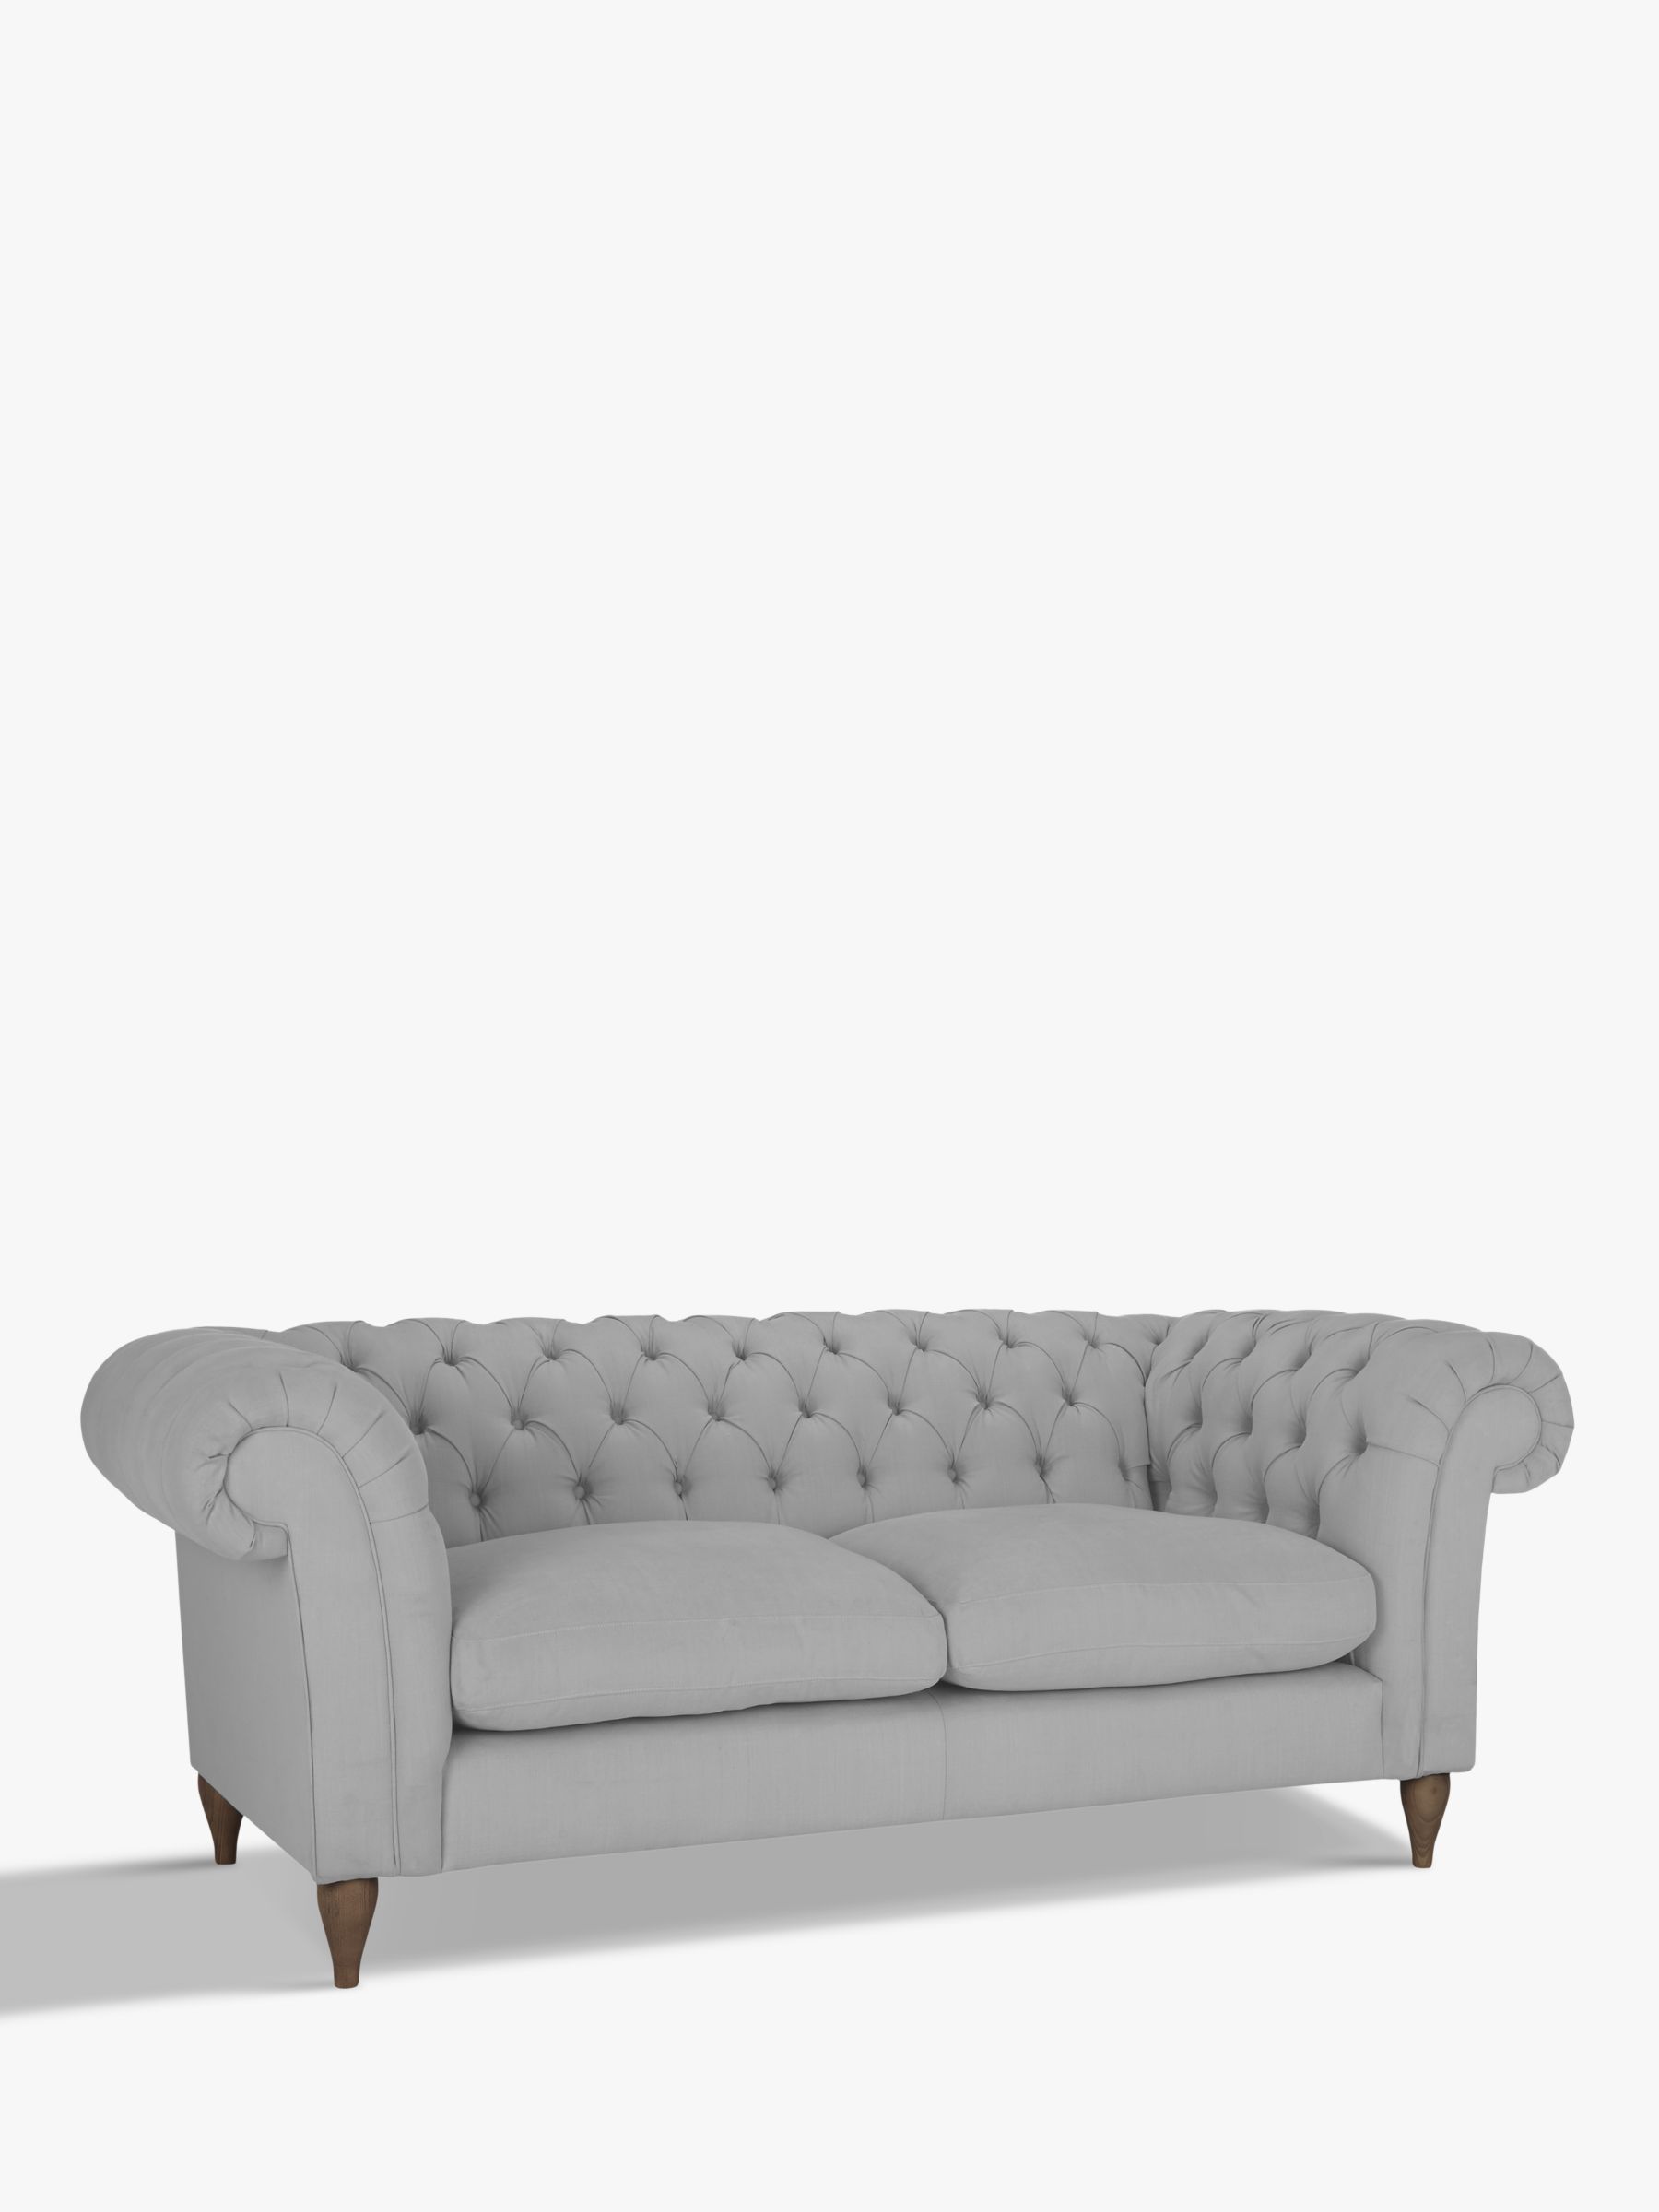 Photo of John lewis cromwell chesterfield grand 4 seater sofa